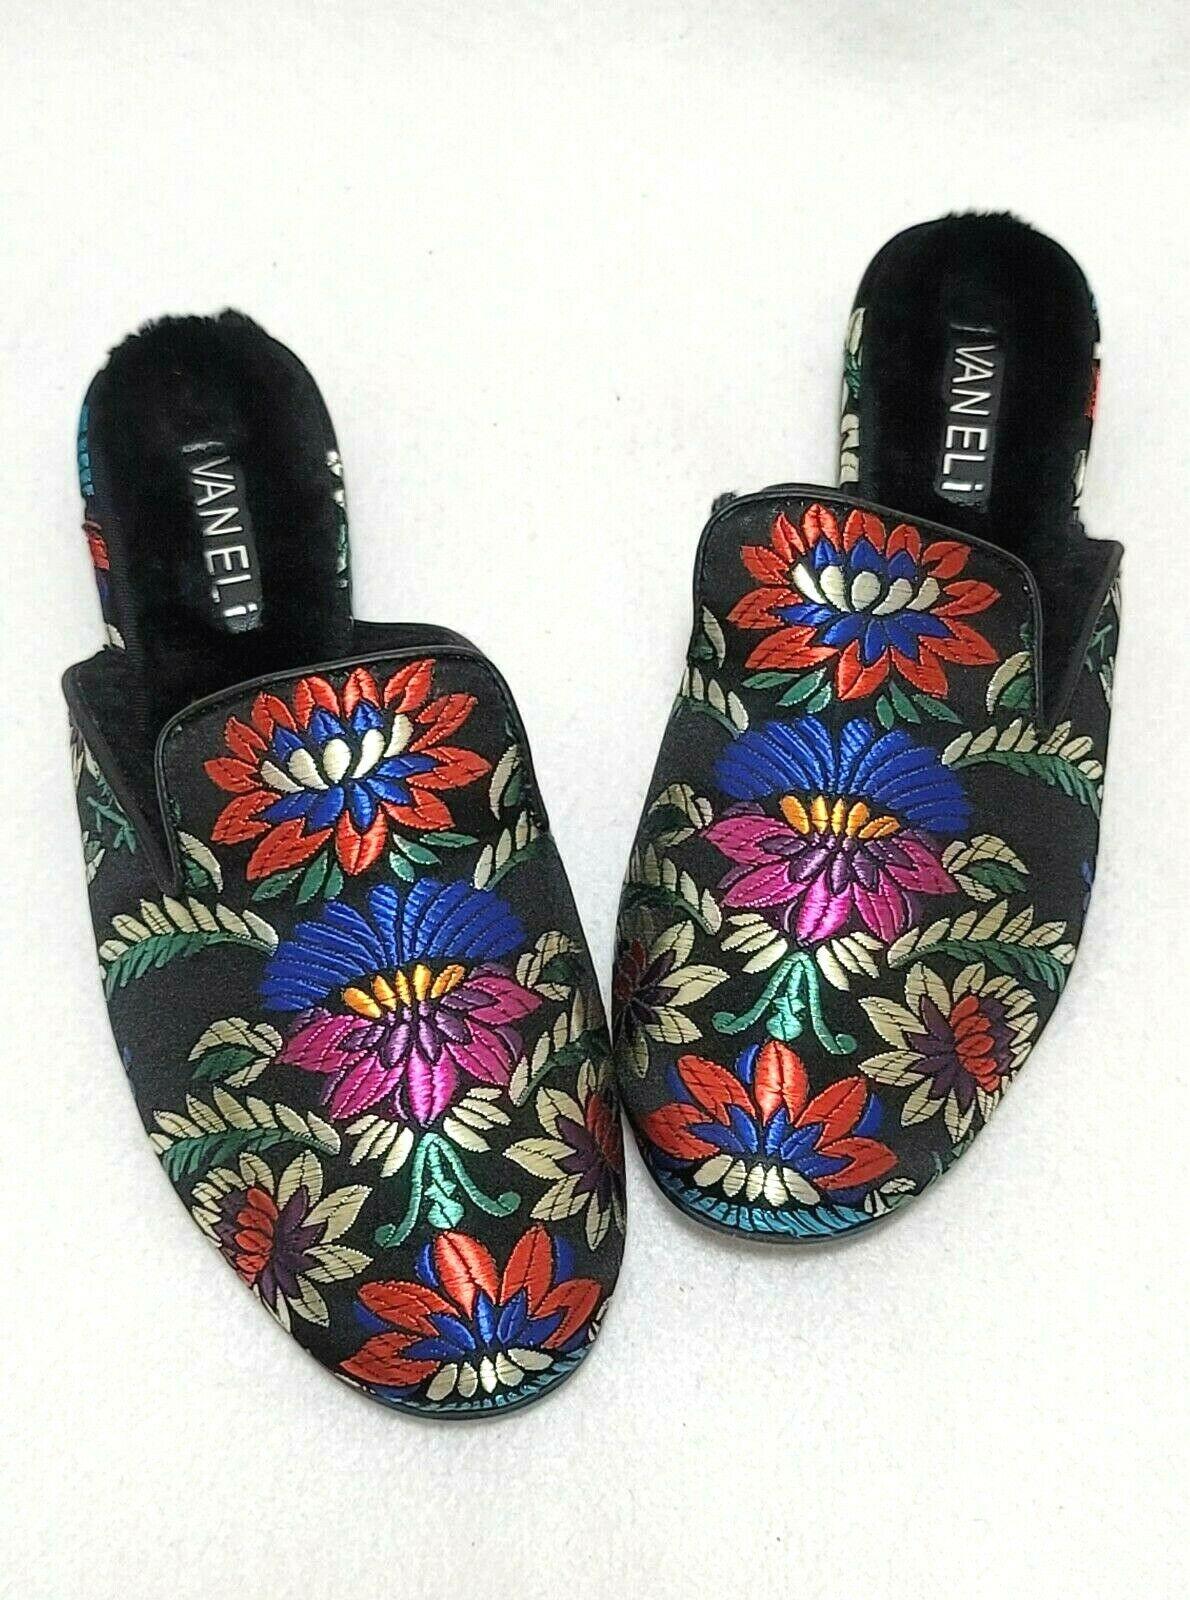 VANELi Waylin Women's Mule Jaquy Fabric Black Embroidered Flowers Shoes US 7 M - SVNYFancy